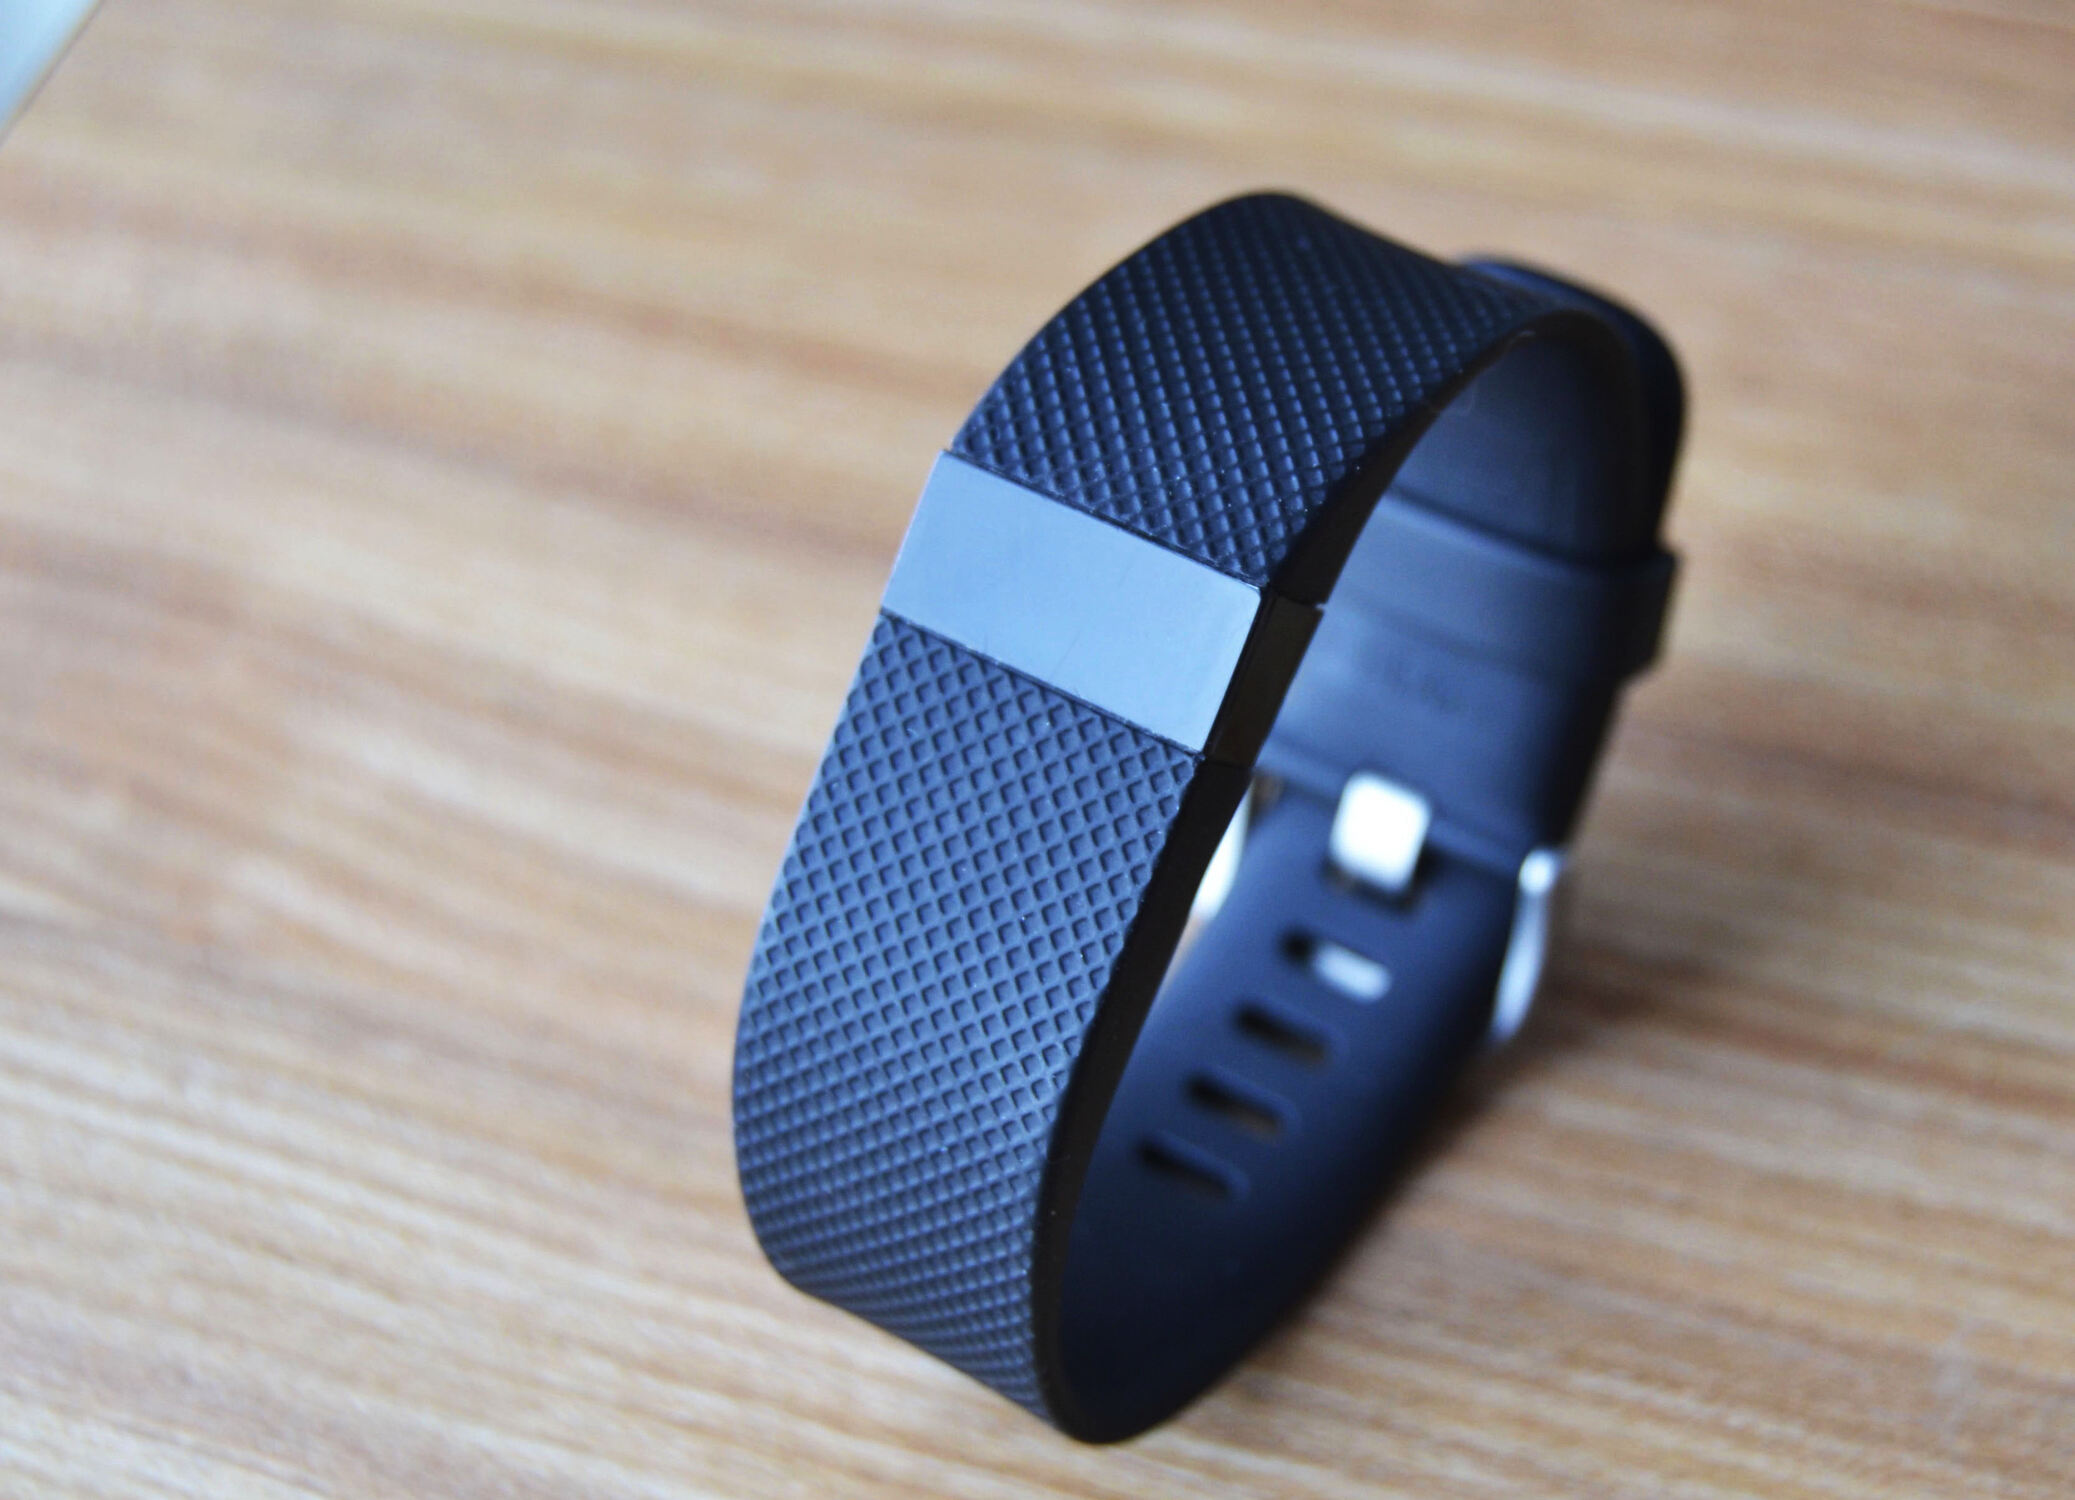 Stay Connected: Enabling Call Notifications On Fitbit Charge HR